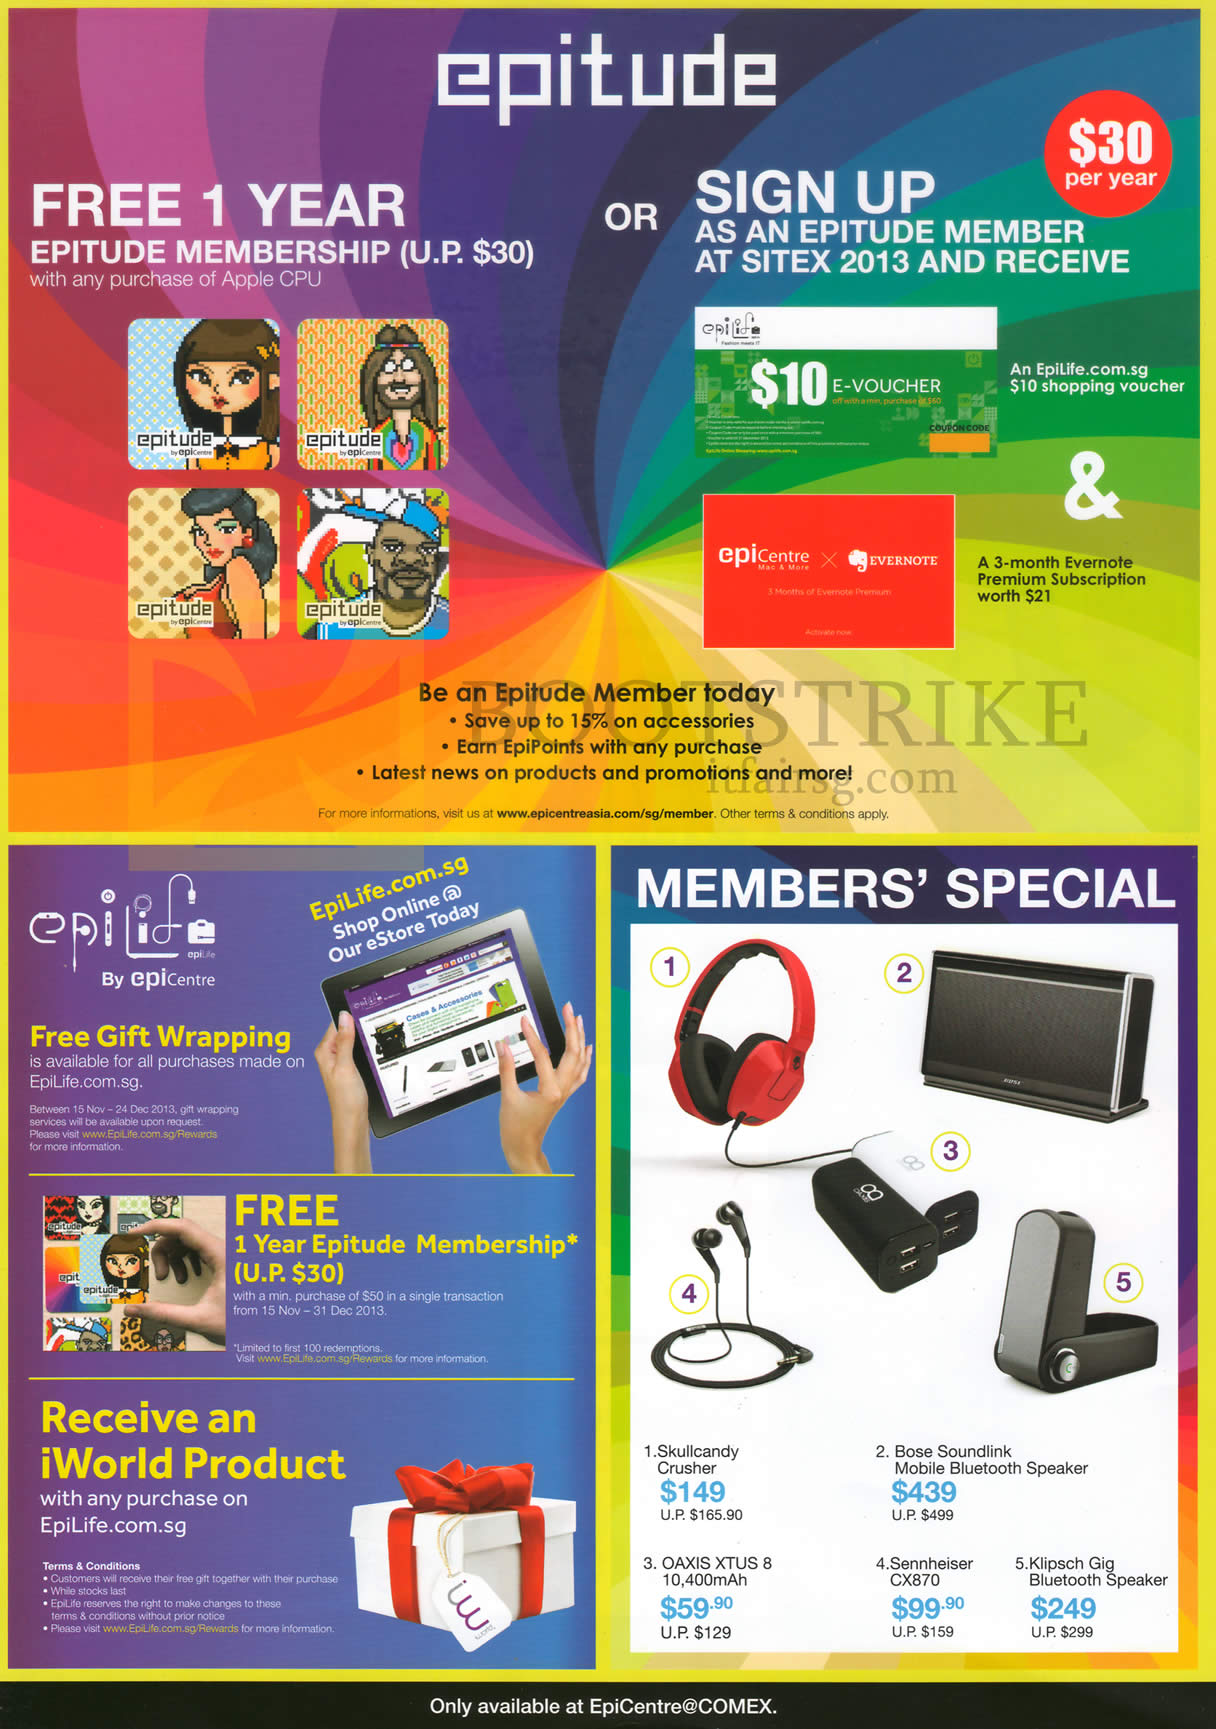 SITEX 2013 price list image brochure of Epicentre Epitude Membership Offers